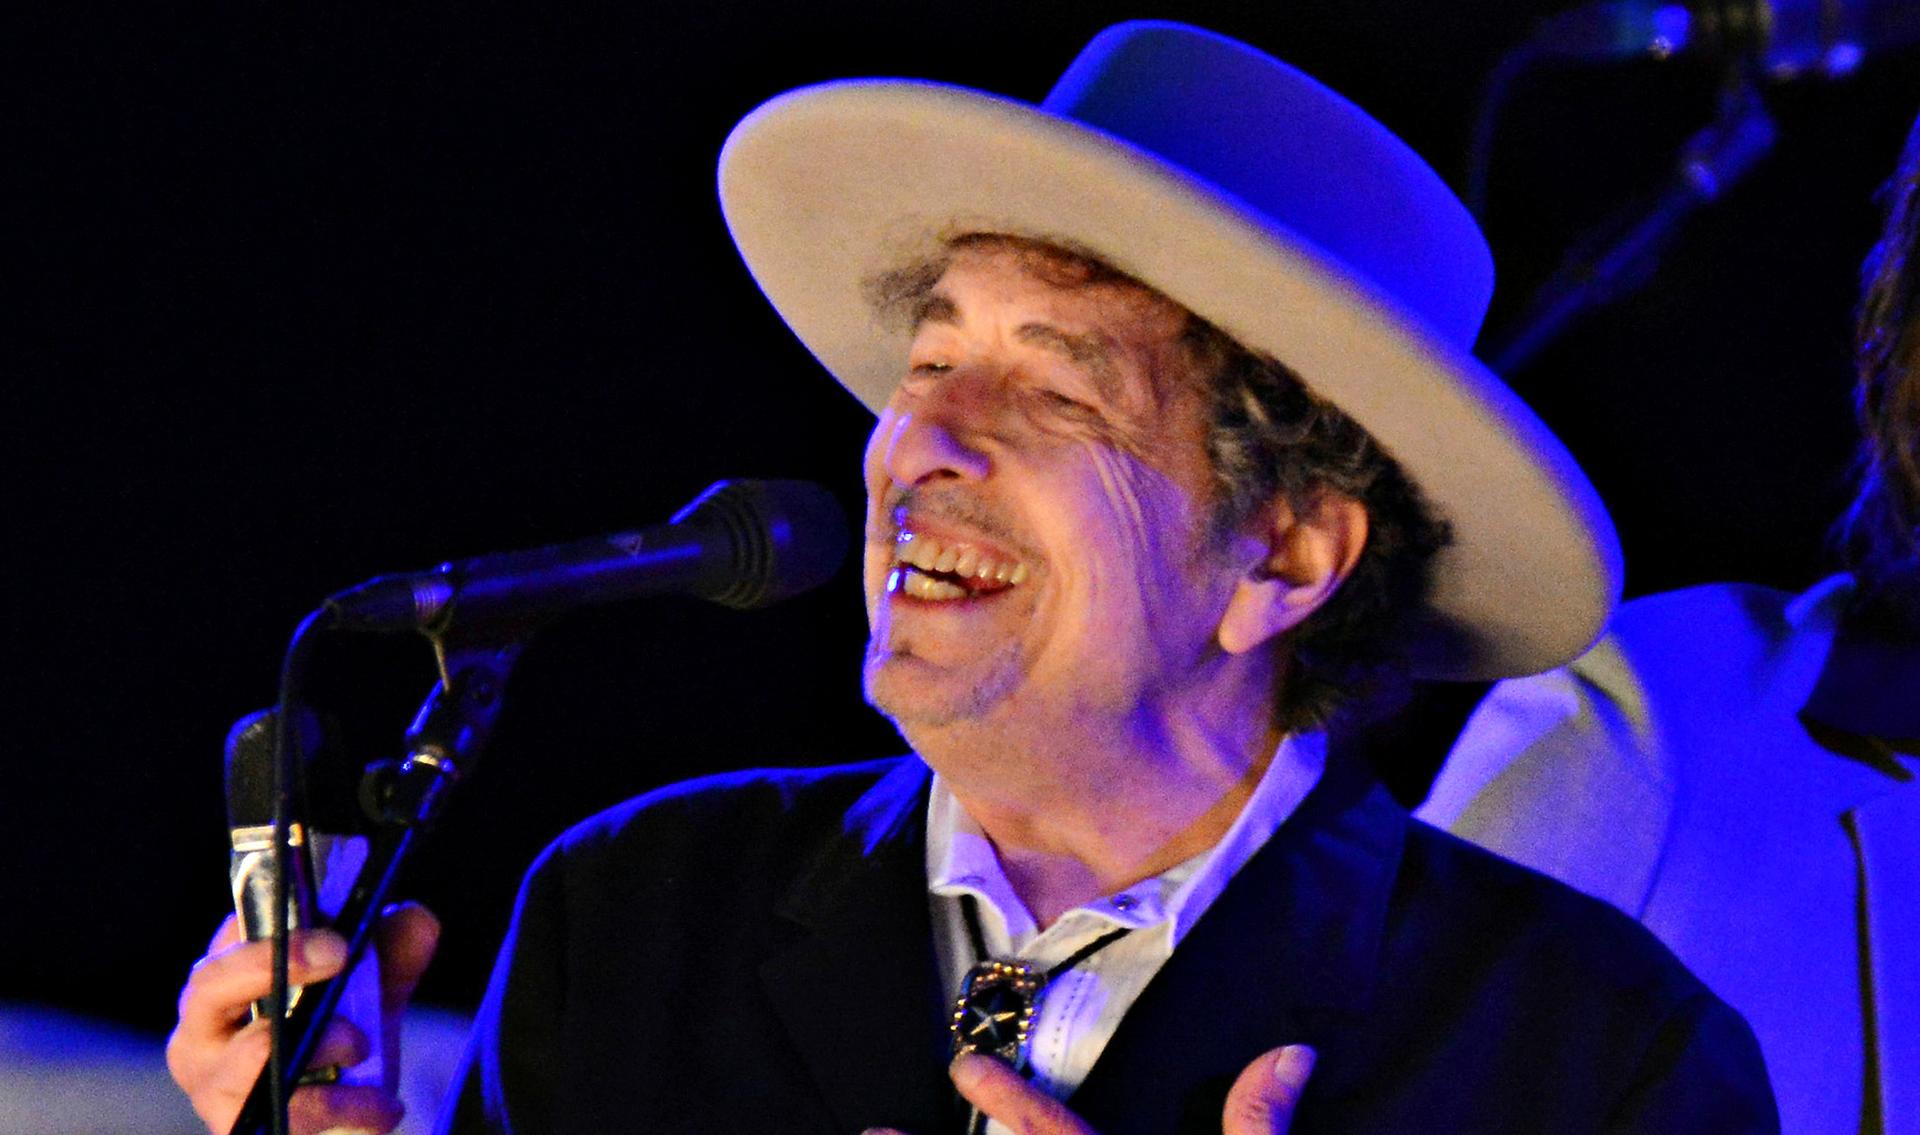 Bob Dylan performs at The Hop Festival in Paddock Wood, Kent, on June 30, 2012.